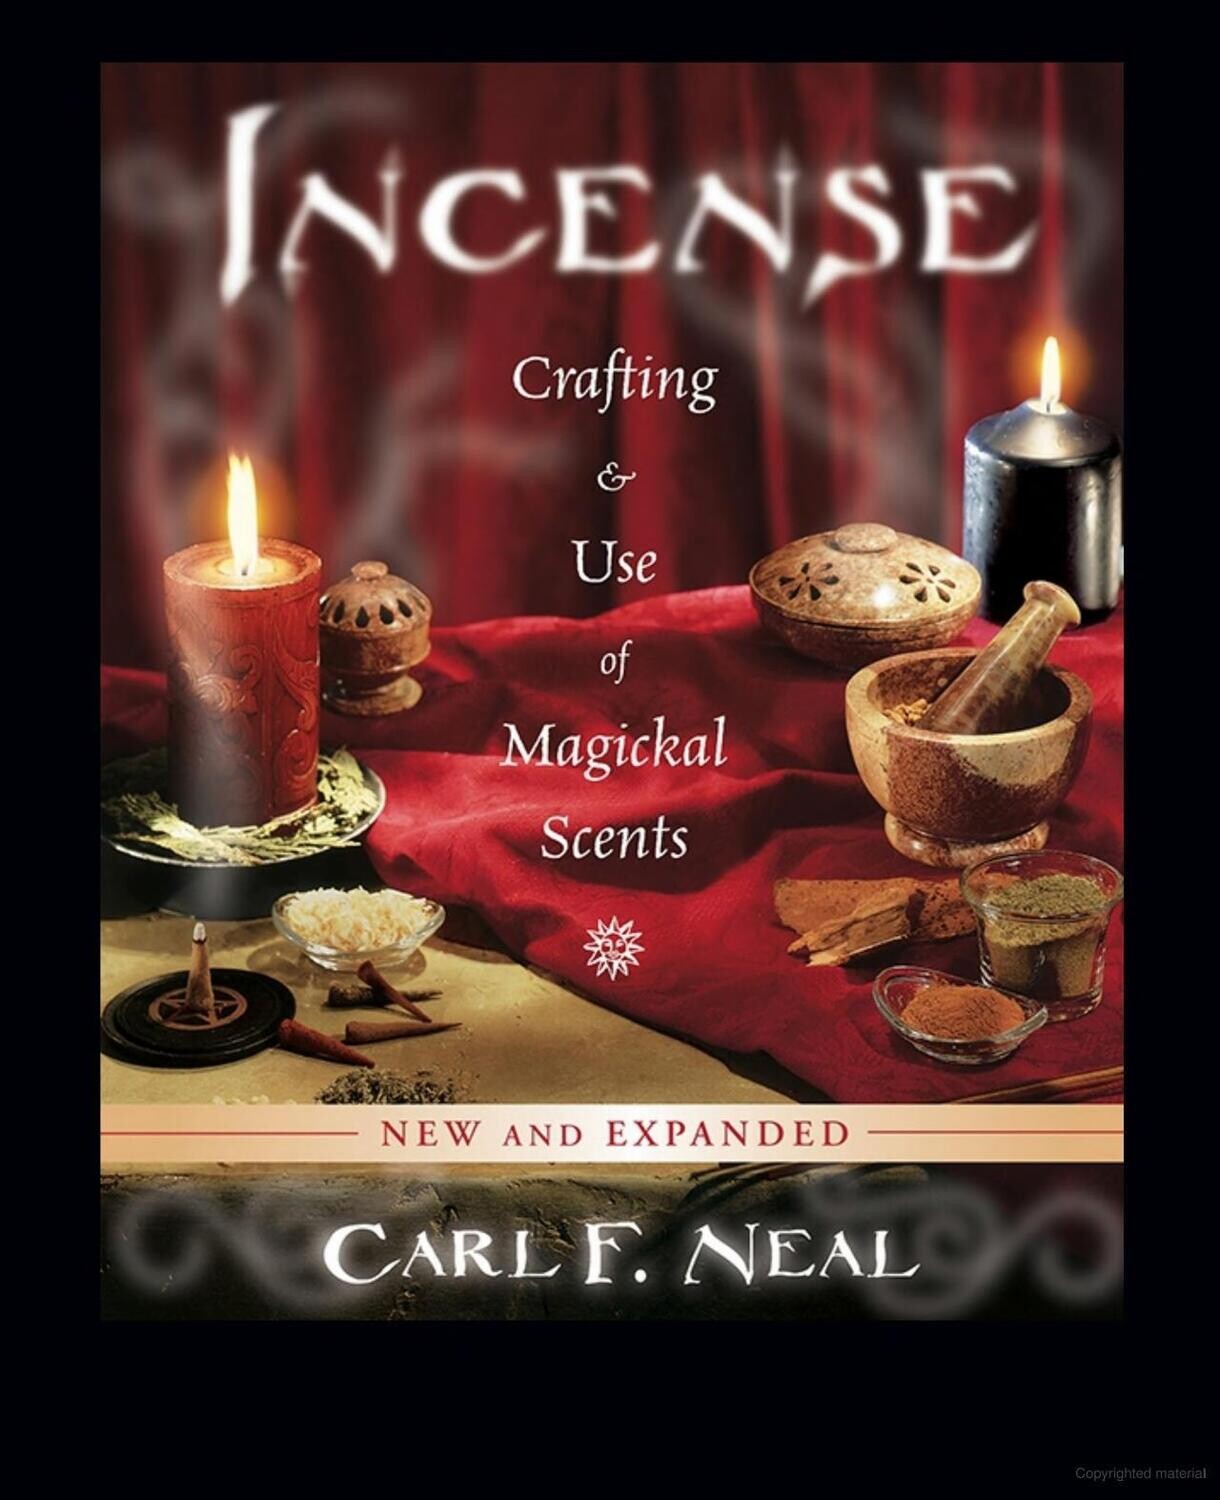 Incense:
Crafting & Use of Magickal Scents
By Carl F. Neal